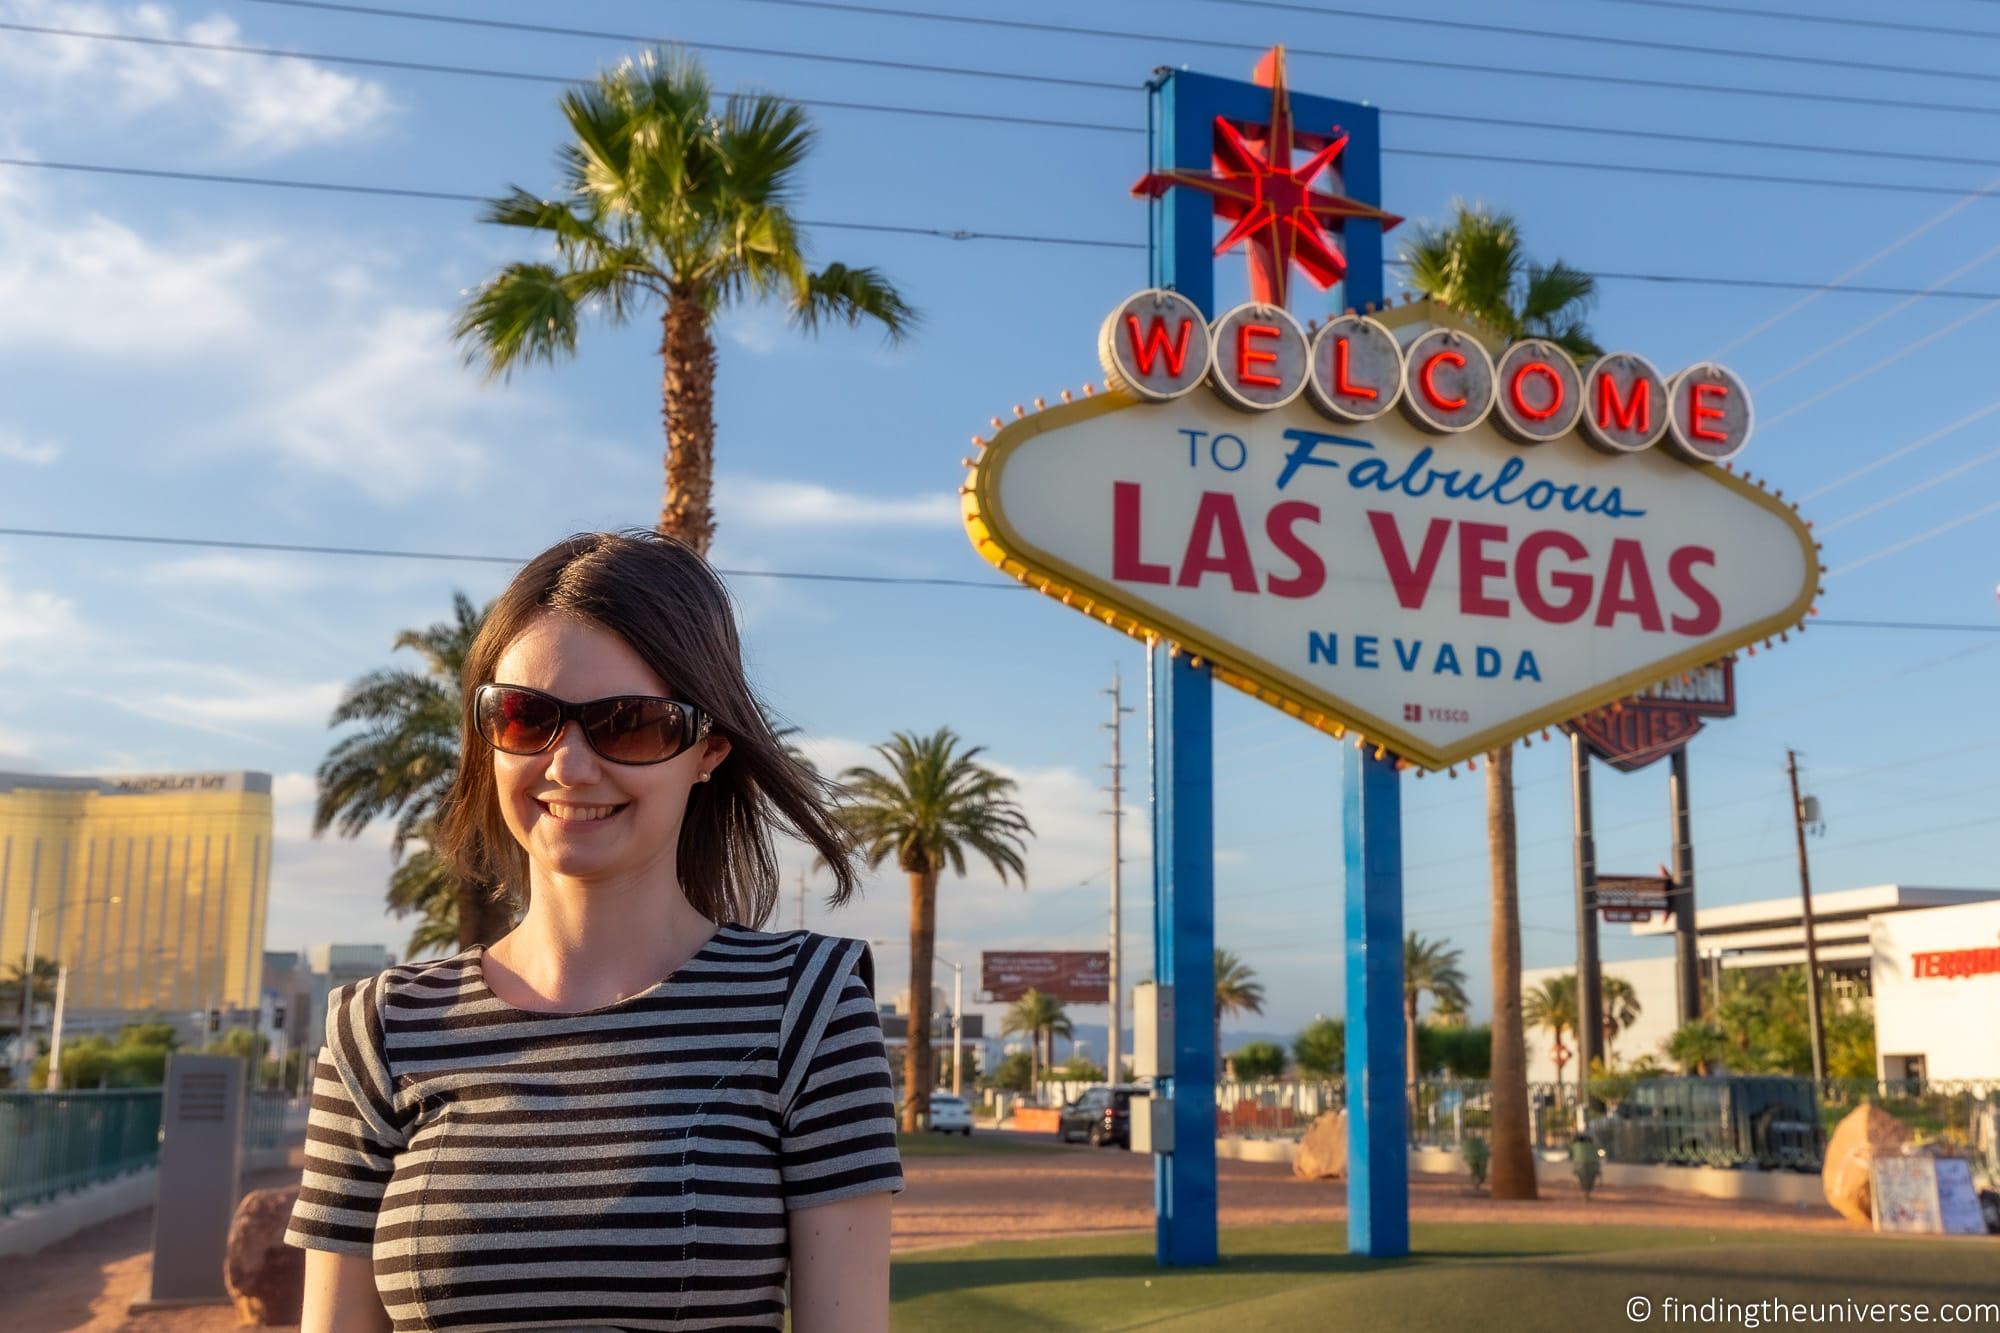 5 Tips For Visiting The Welcome To Las Vegas Sign